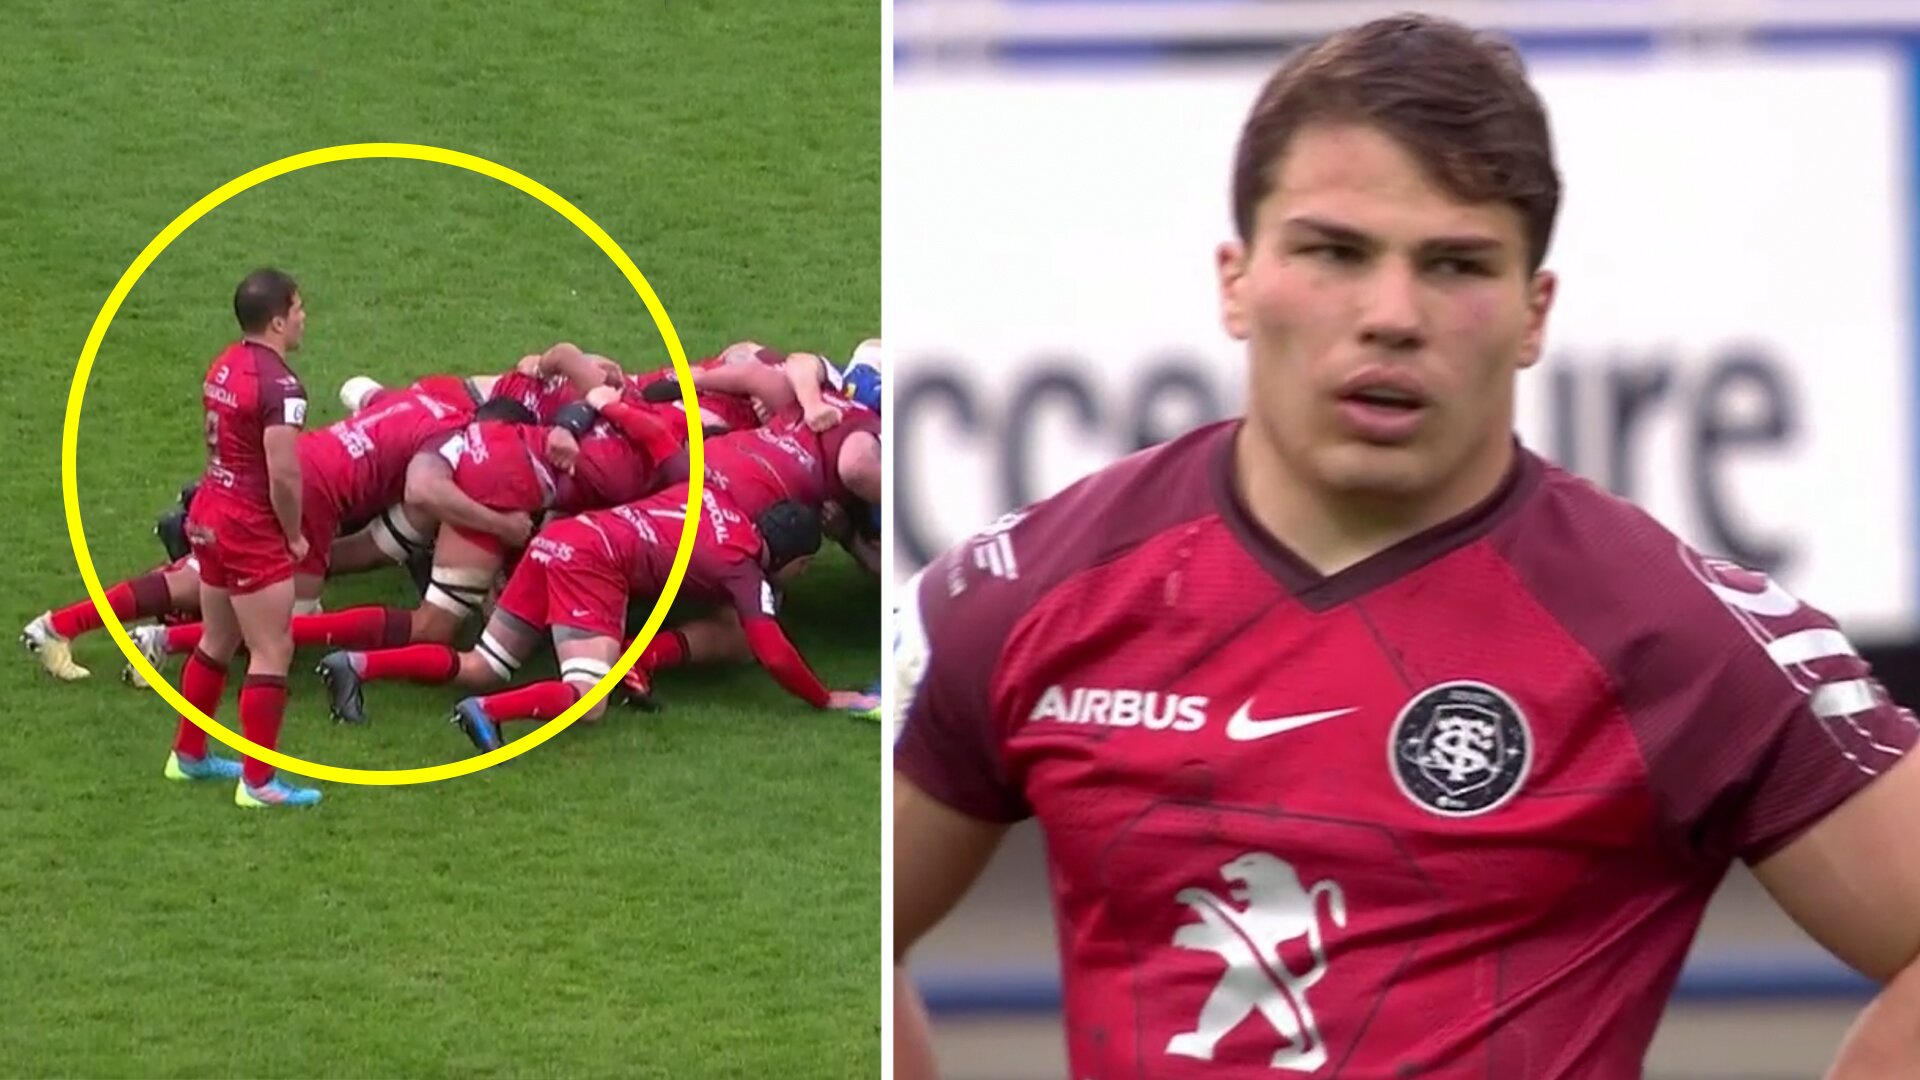 Someone has worked out one of the key reasons why Antoine Dupont is so dominant at scrum half in rugby